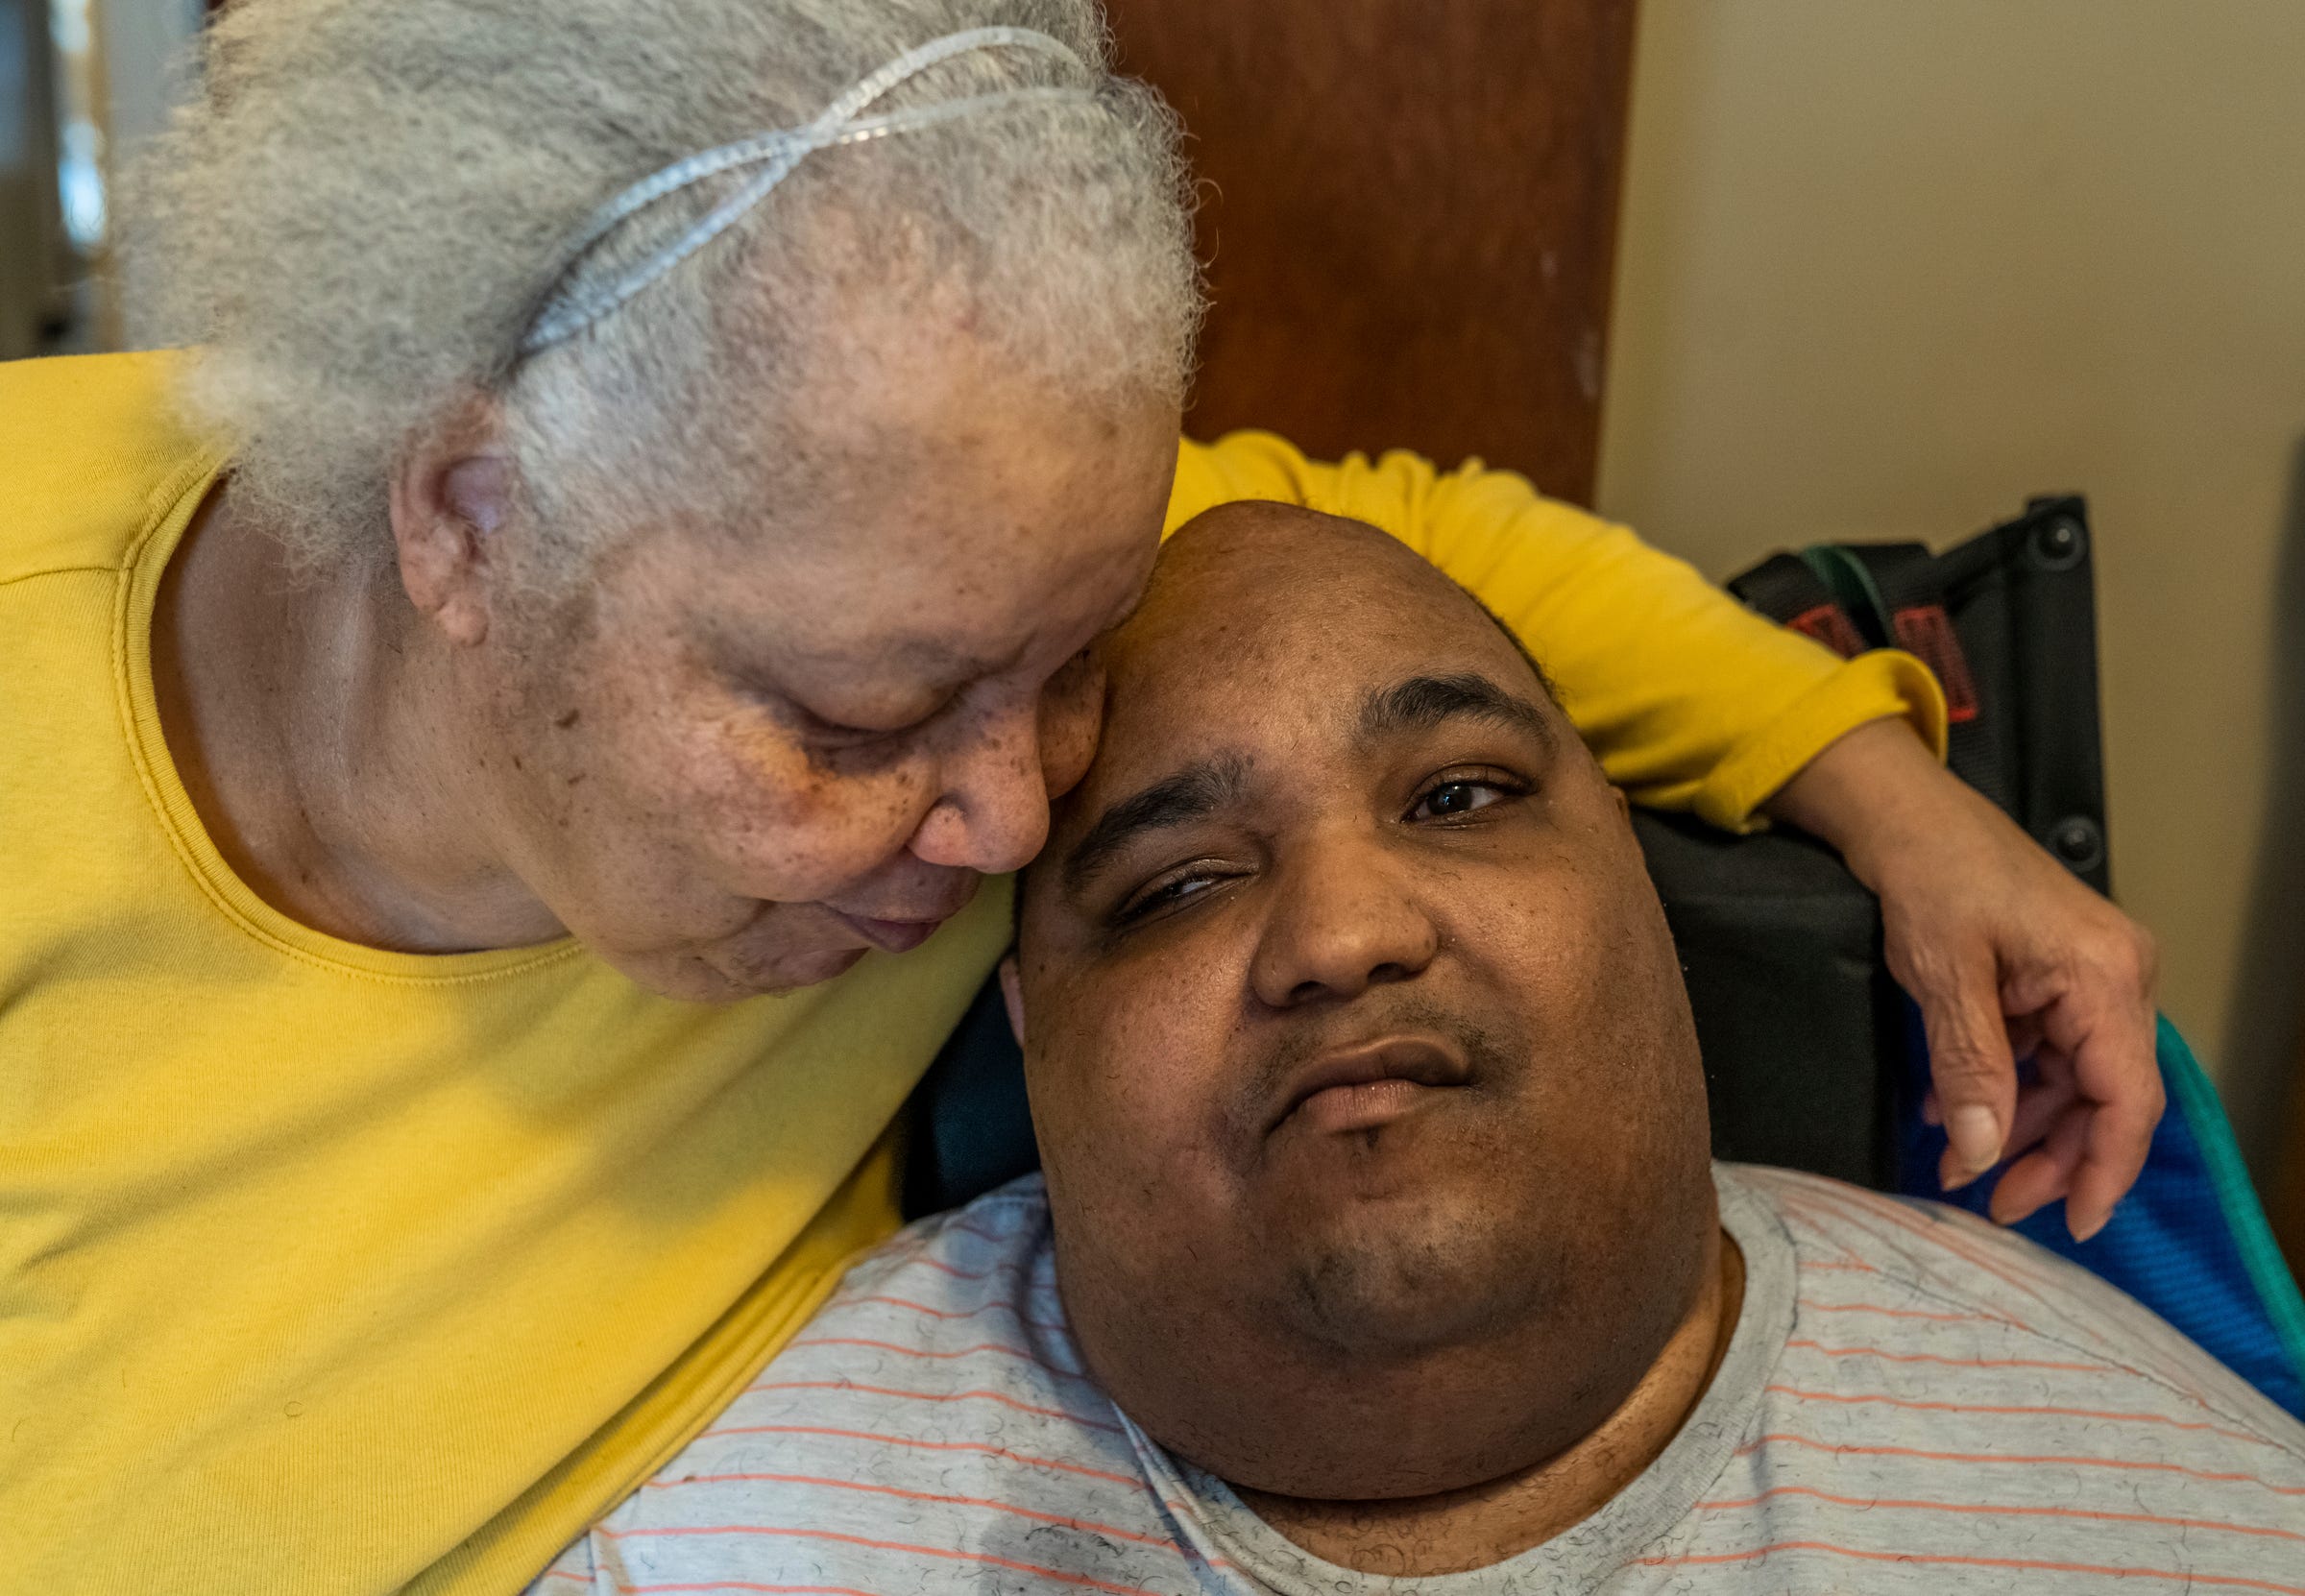 Debra Westbrook, of Detroit, rests her face on her son Marvin McQueen Jr. inside their home in Detroit on Thursday, Feb. 10, 2022. For the past five years, the two of them have been stranded inside their west-side house.